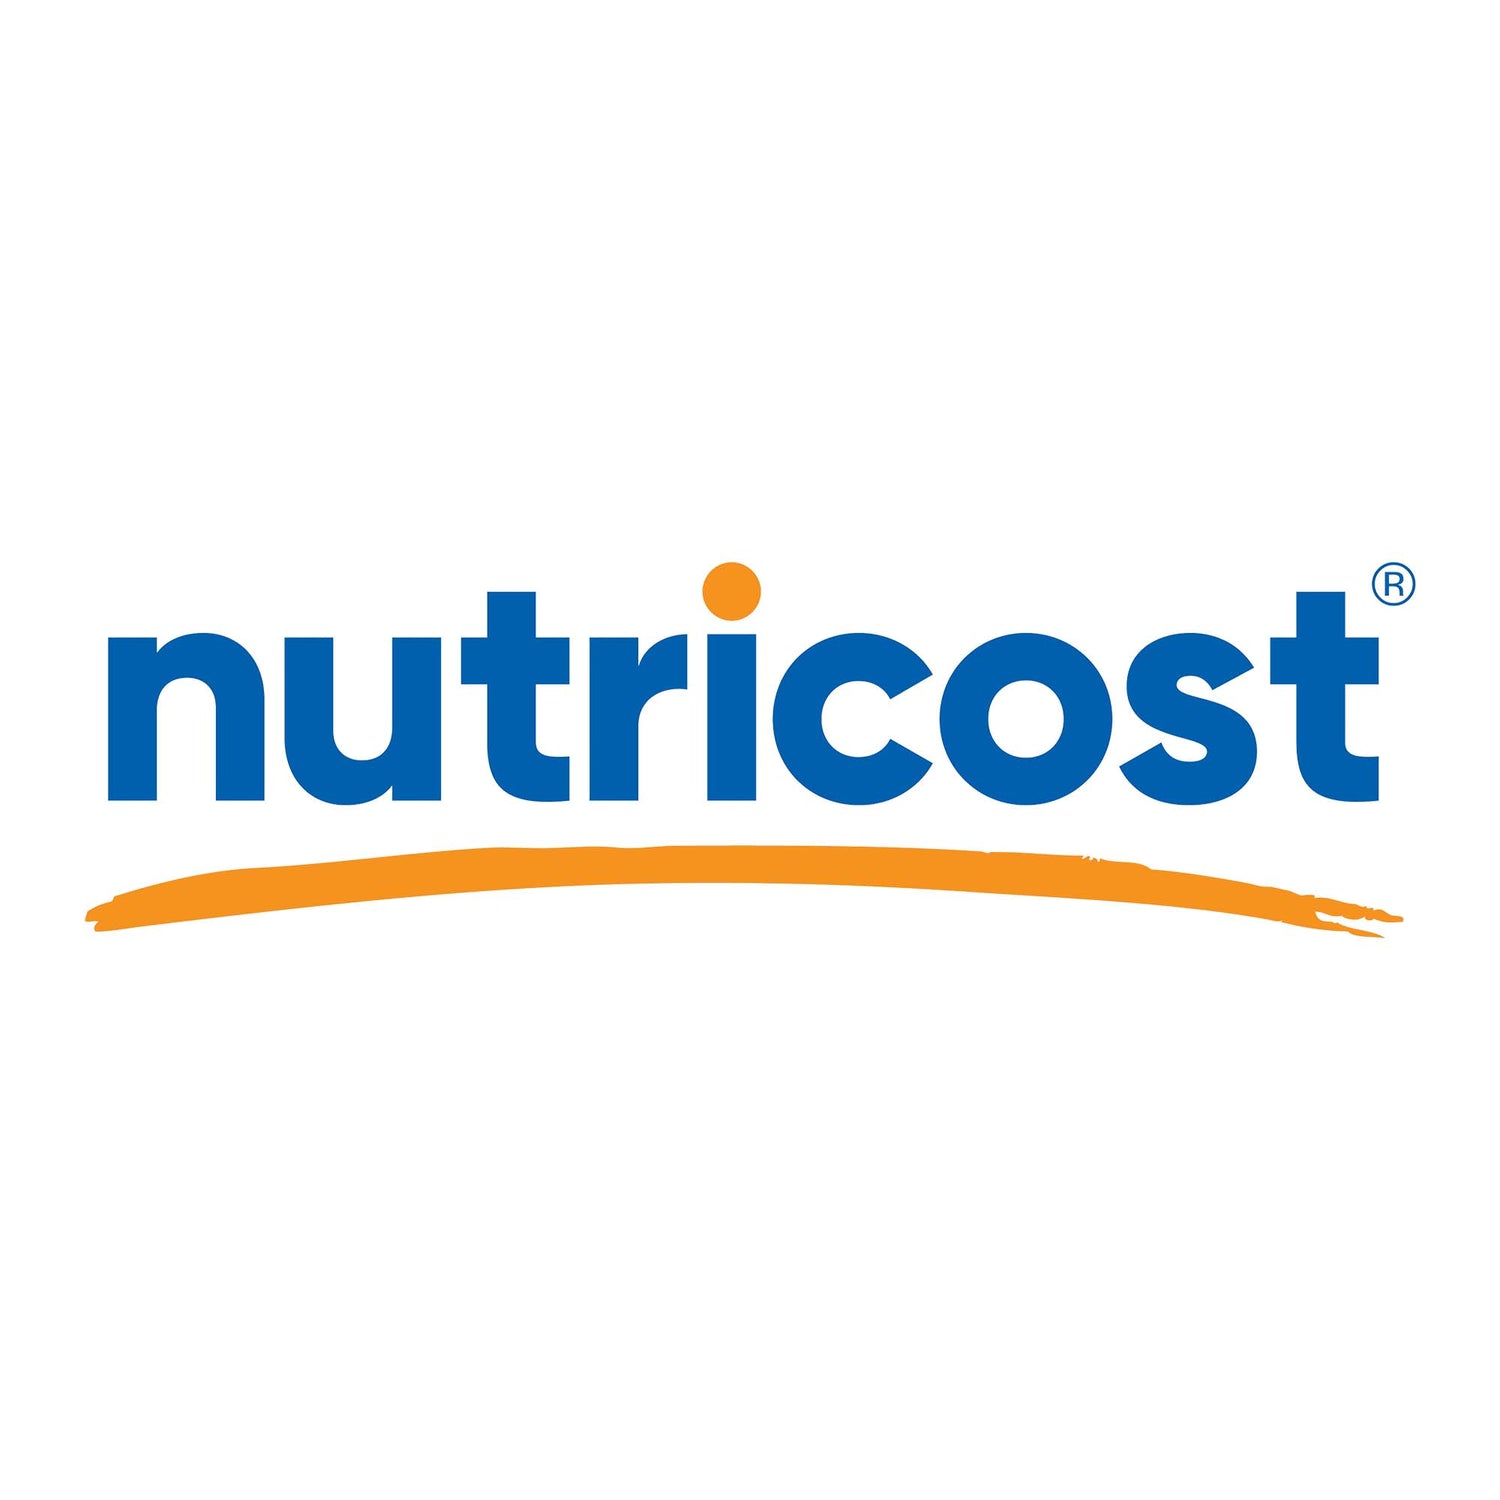 Navigate through Discount Annex's extensive Nutricost Collection, where superior quality meets affordability in wellness products. Our vast range of Nutricost supplements is designed to cater to diverse health needs, all evidence-based and meticulously tested. Enjoy unbeatable prices and start your journey to an improved, healthier lifestyle with Nutricost products from Discount Annex today.